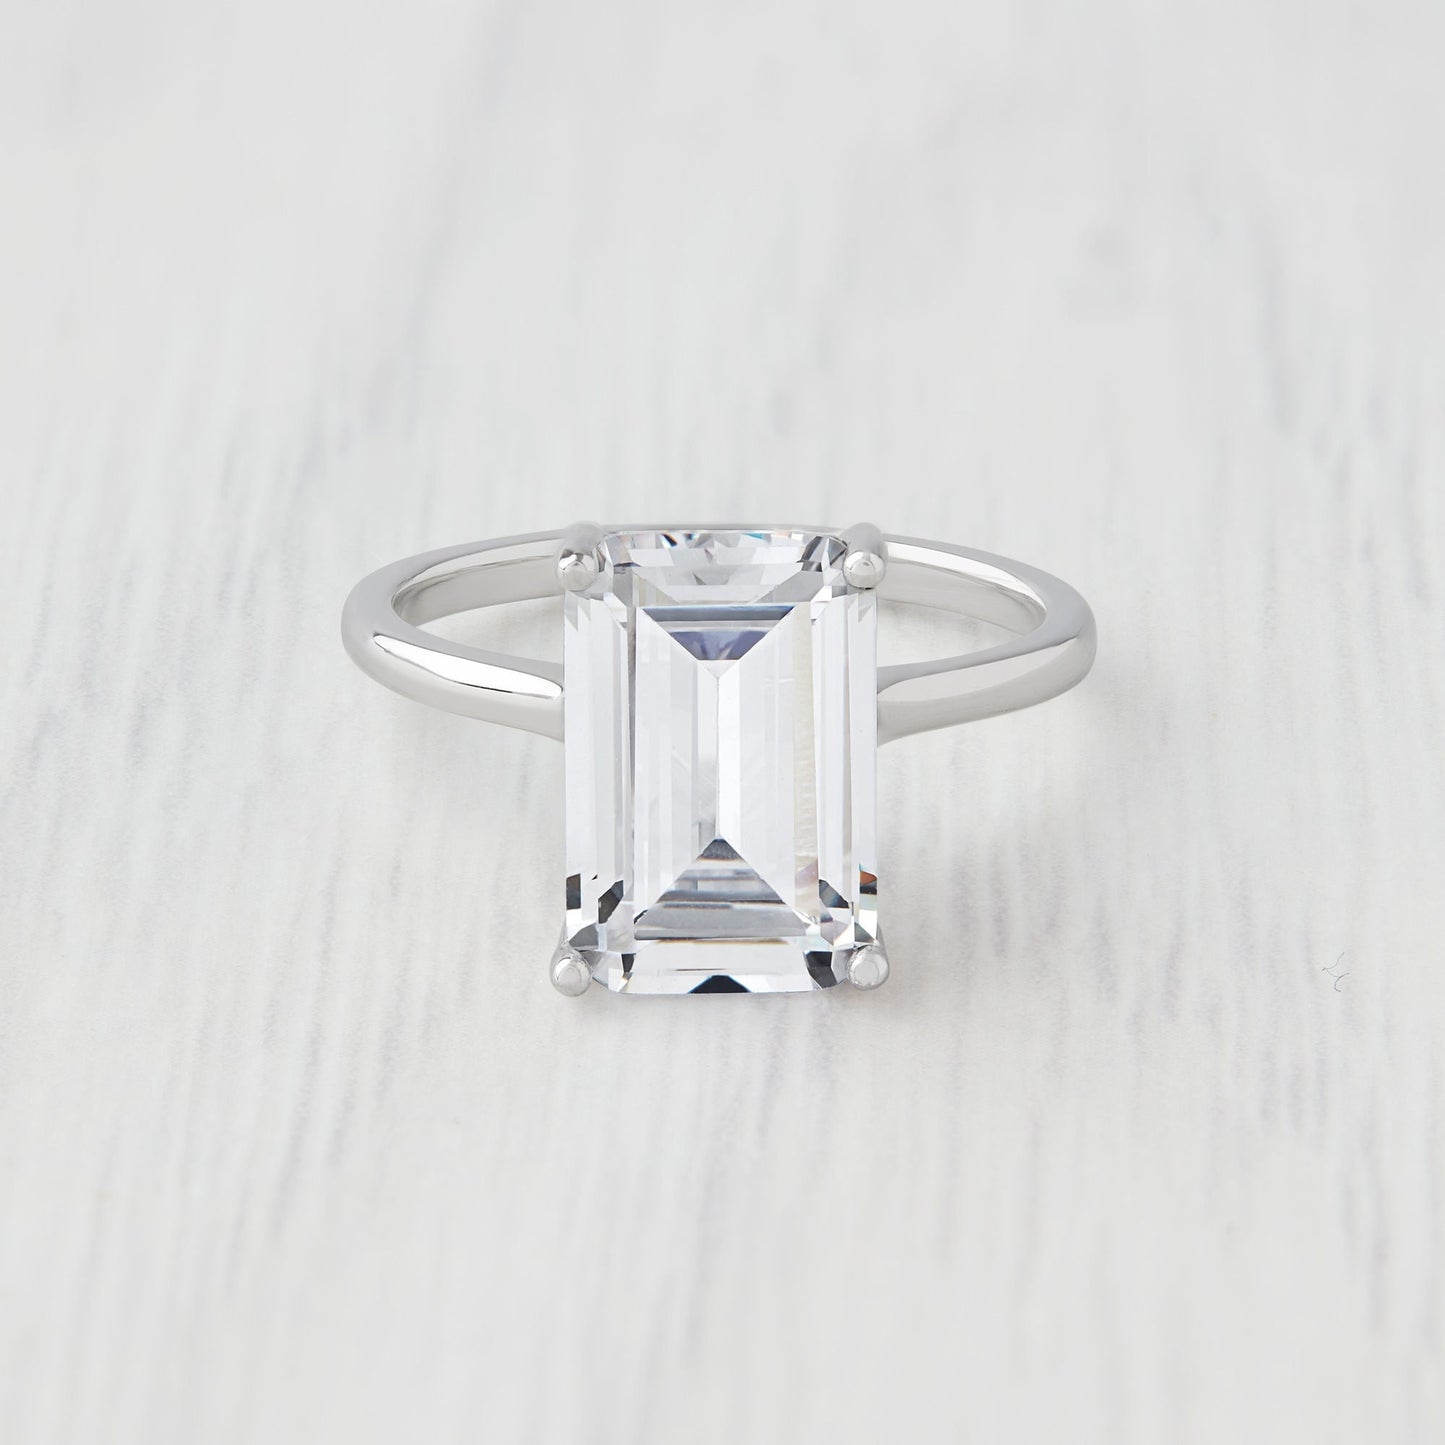 4ct Emerald cut Moissanite solitaire ring in solid gold or platinum - engagement ring